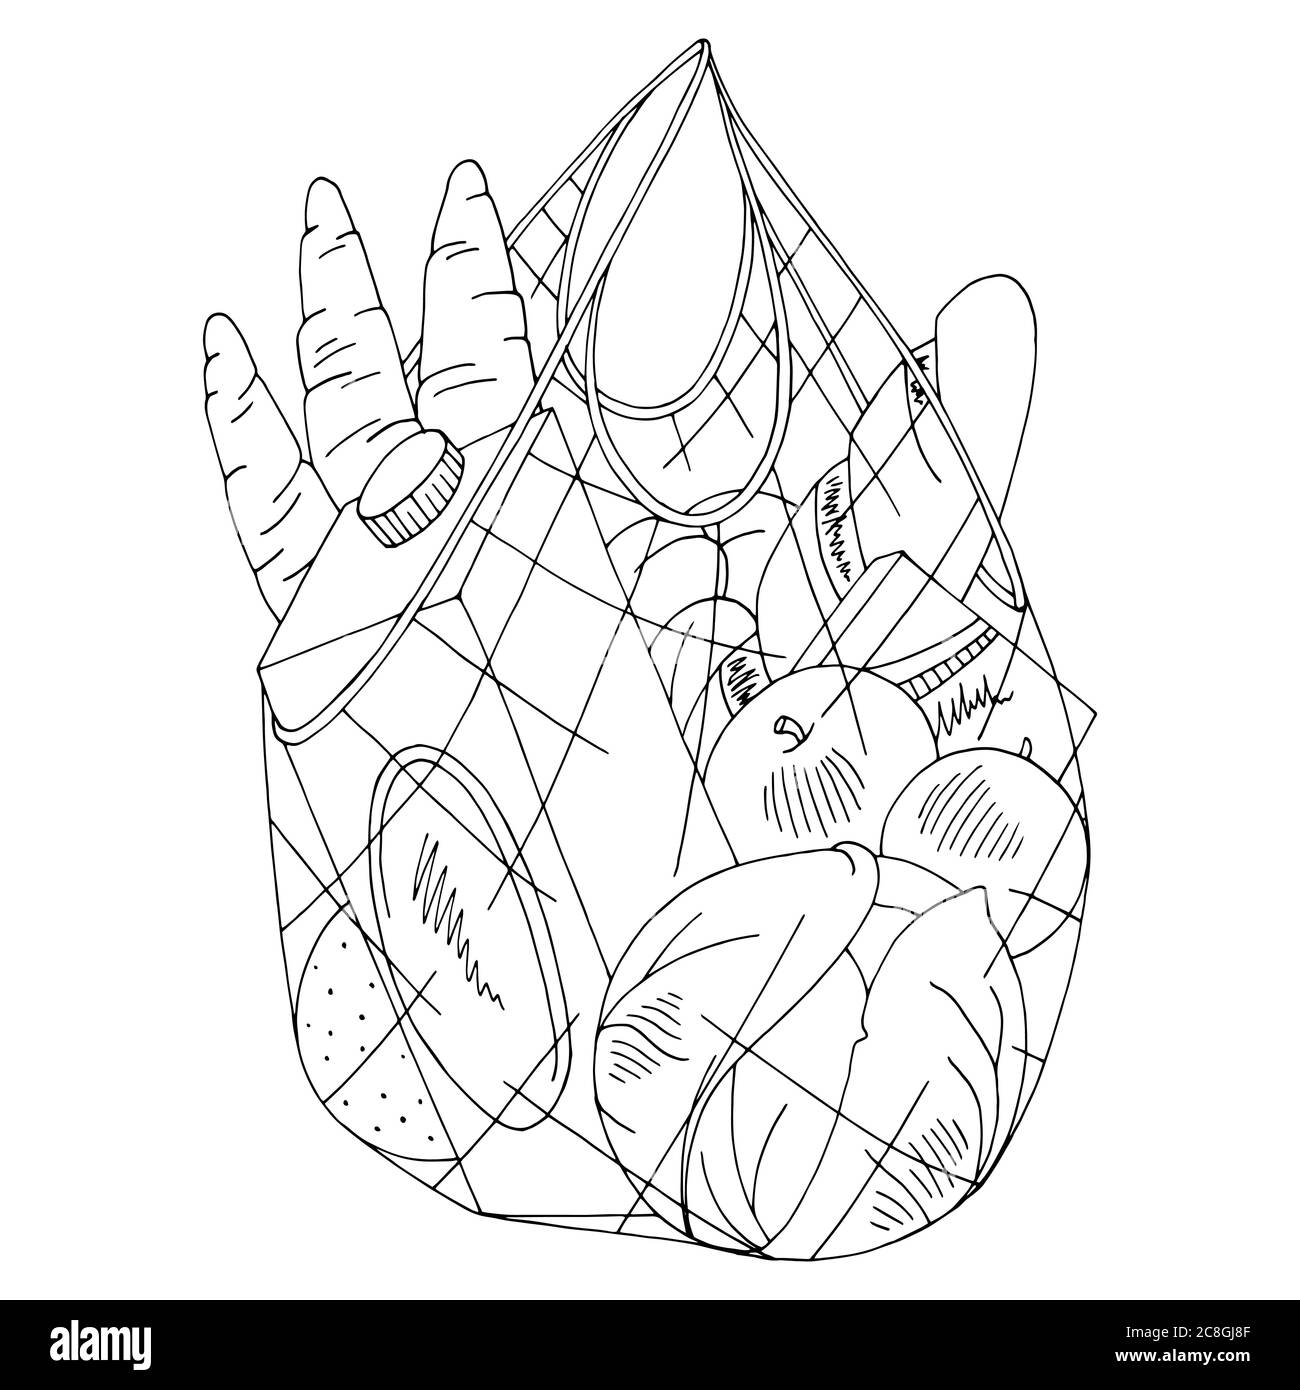 Grocery eco string bag graphic isolated black white sketch illustration vector Stock Vector